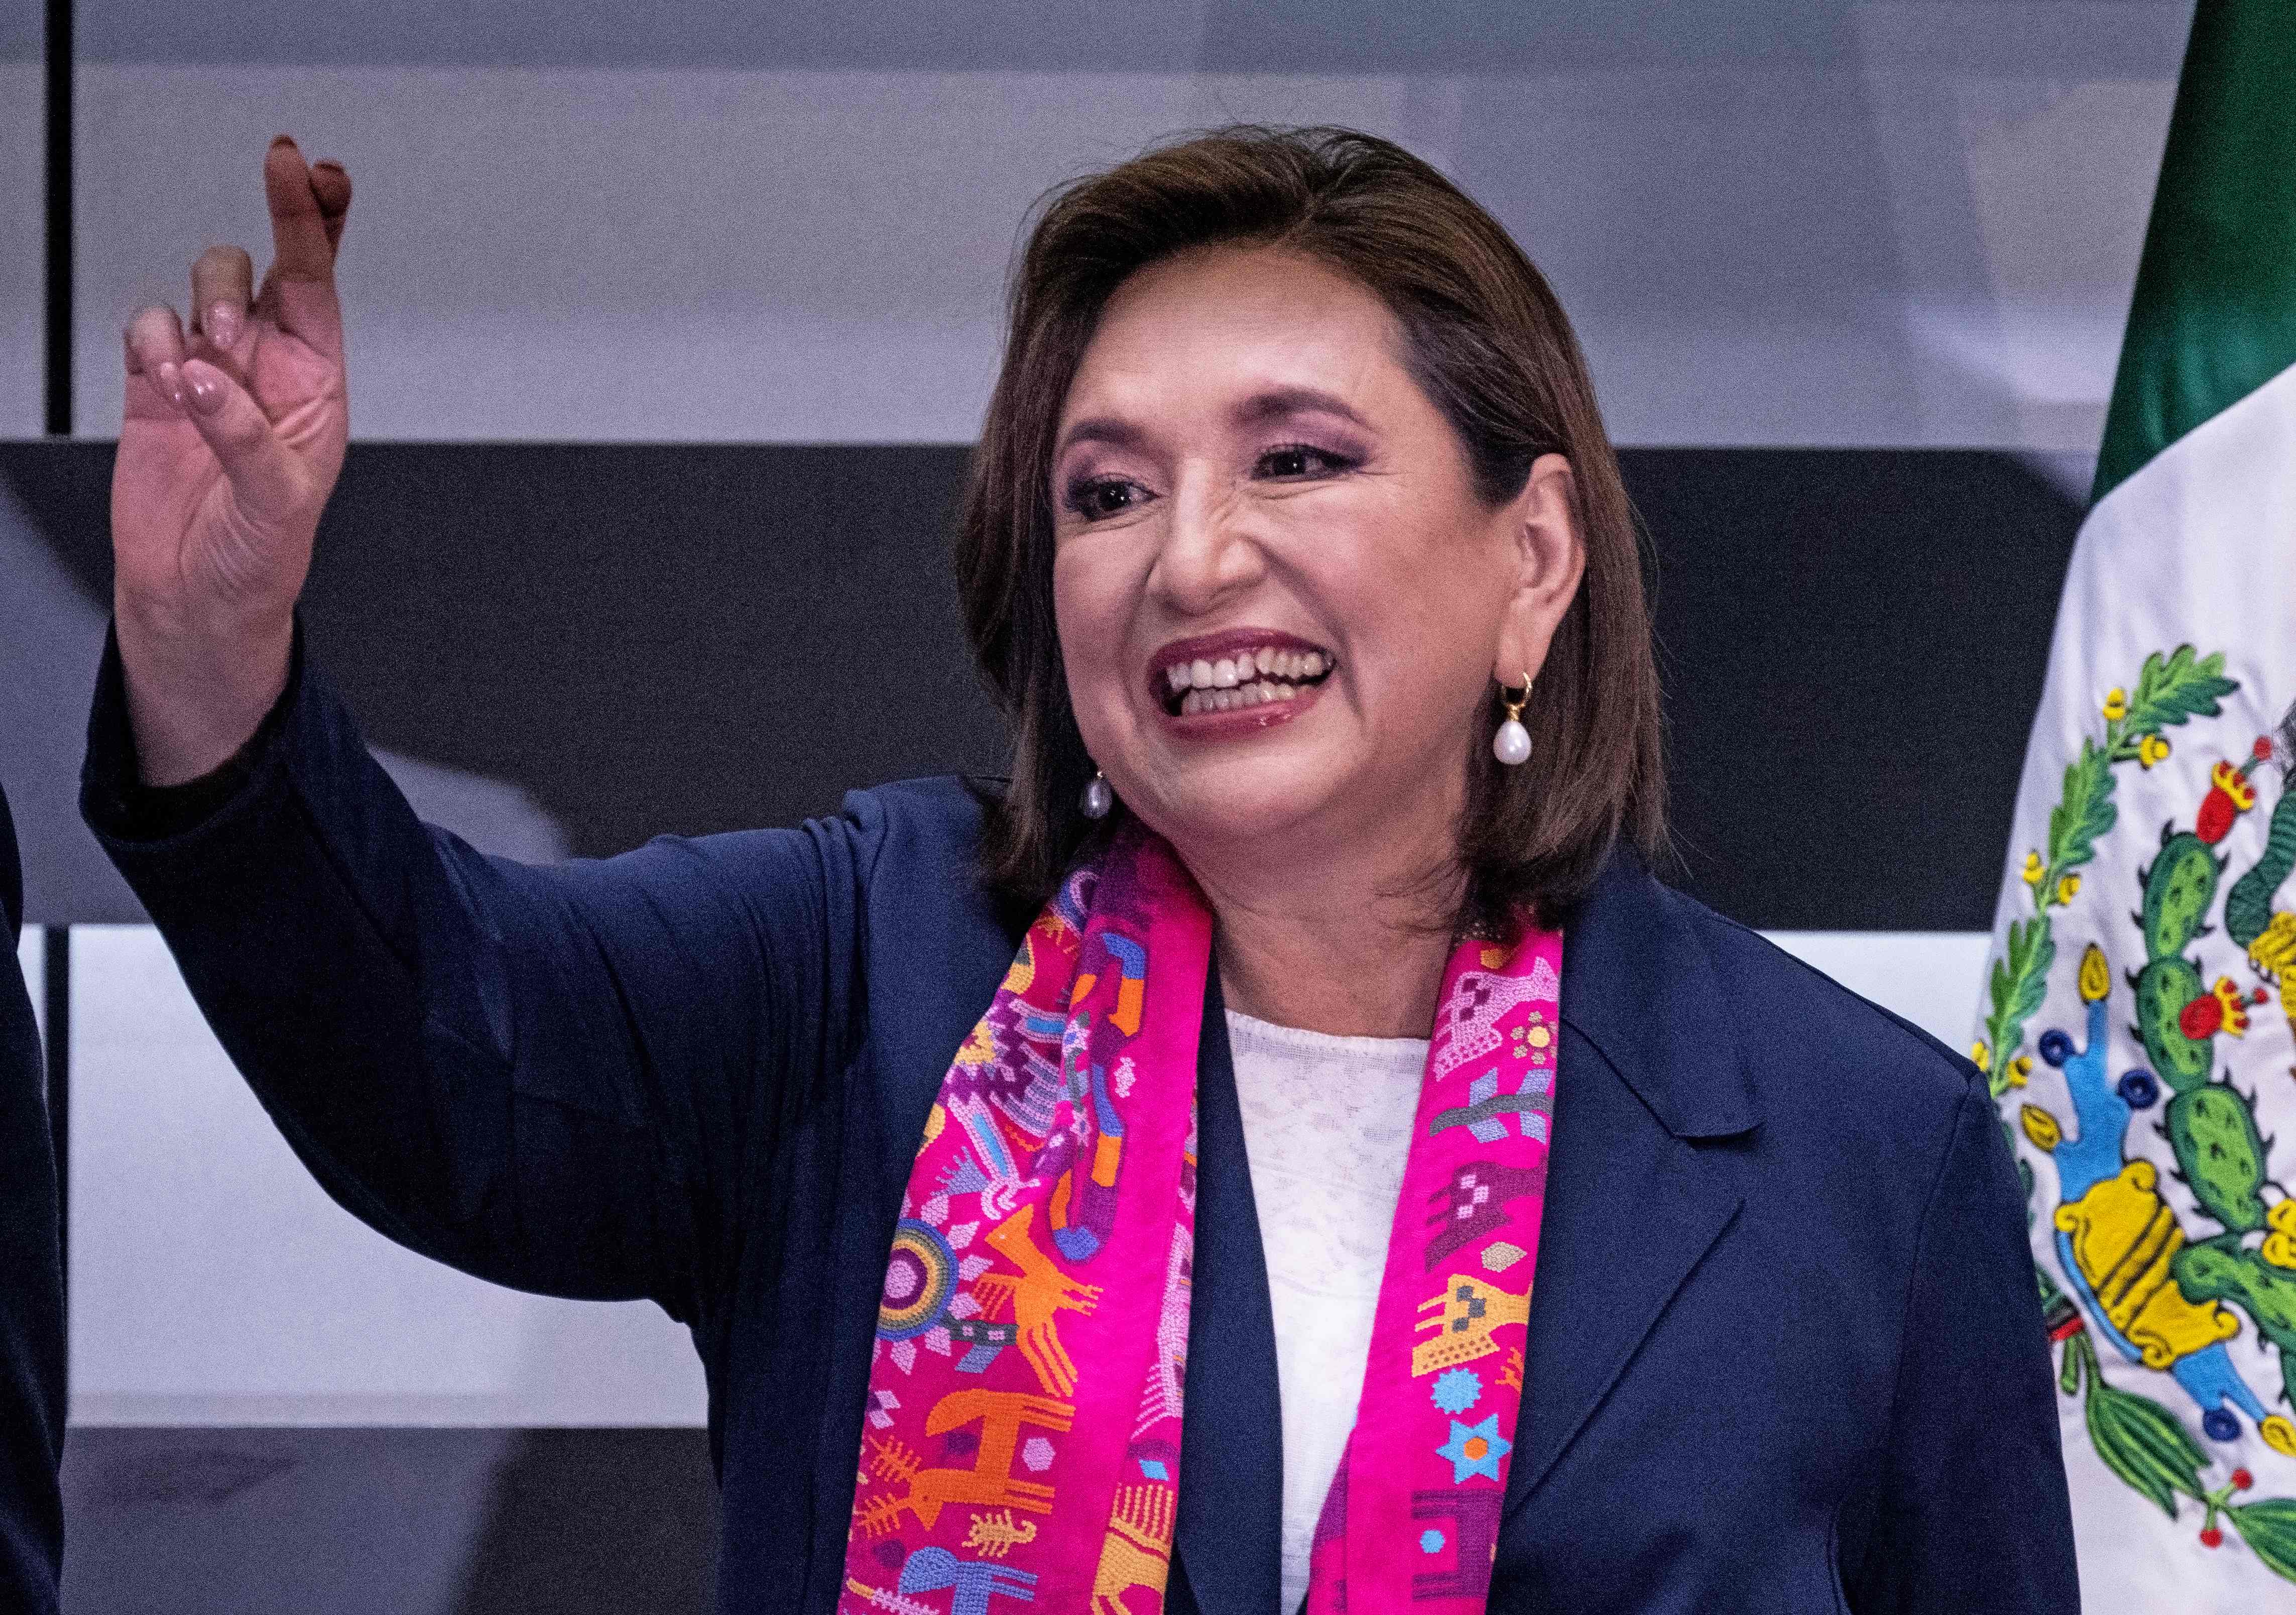 Opposition candidate Xochitl Galvez of the Fuerza y Corazon por Mexico coalition party gestures as she officially registers as a presidential candidate for the upcoming June 2, 2024, general election at the National Electoral Institute (INE) in Mexico City, Mexico, on February 20, 2024. (Photo by CARL DE SOUZA / AFP)